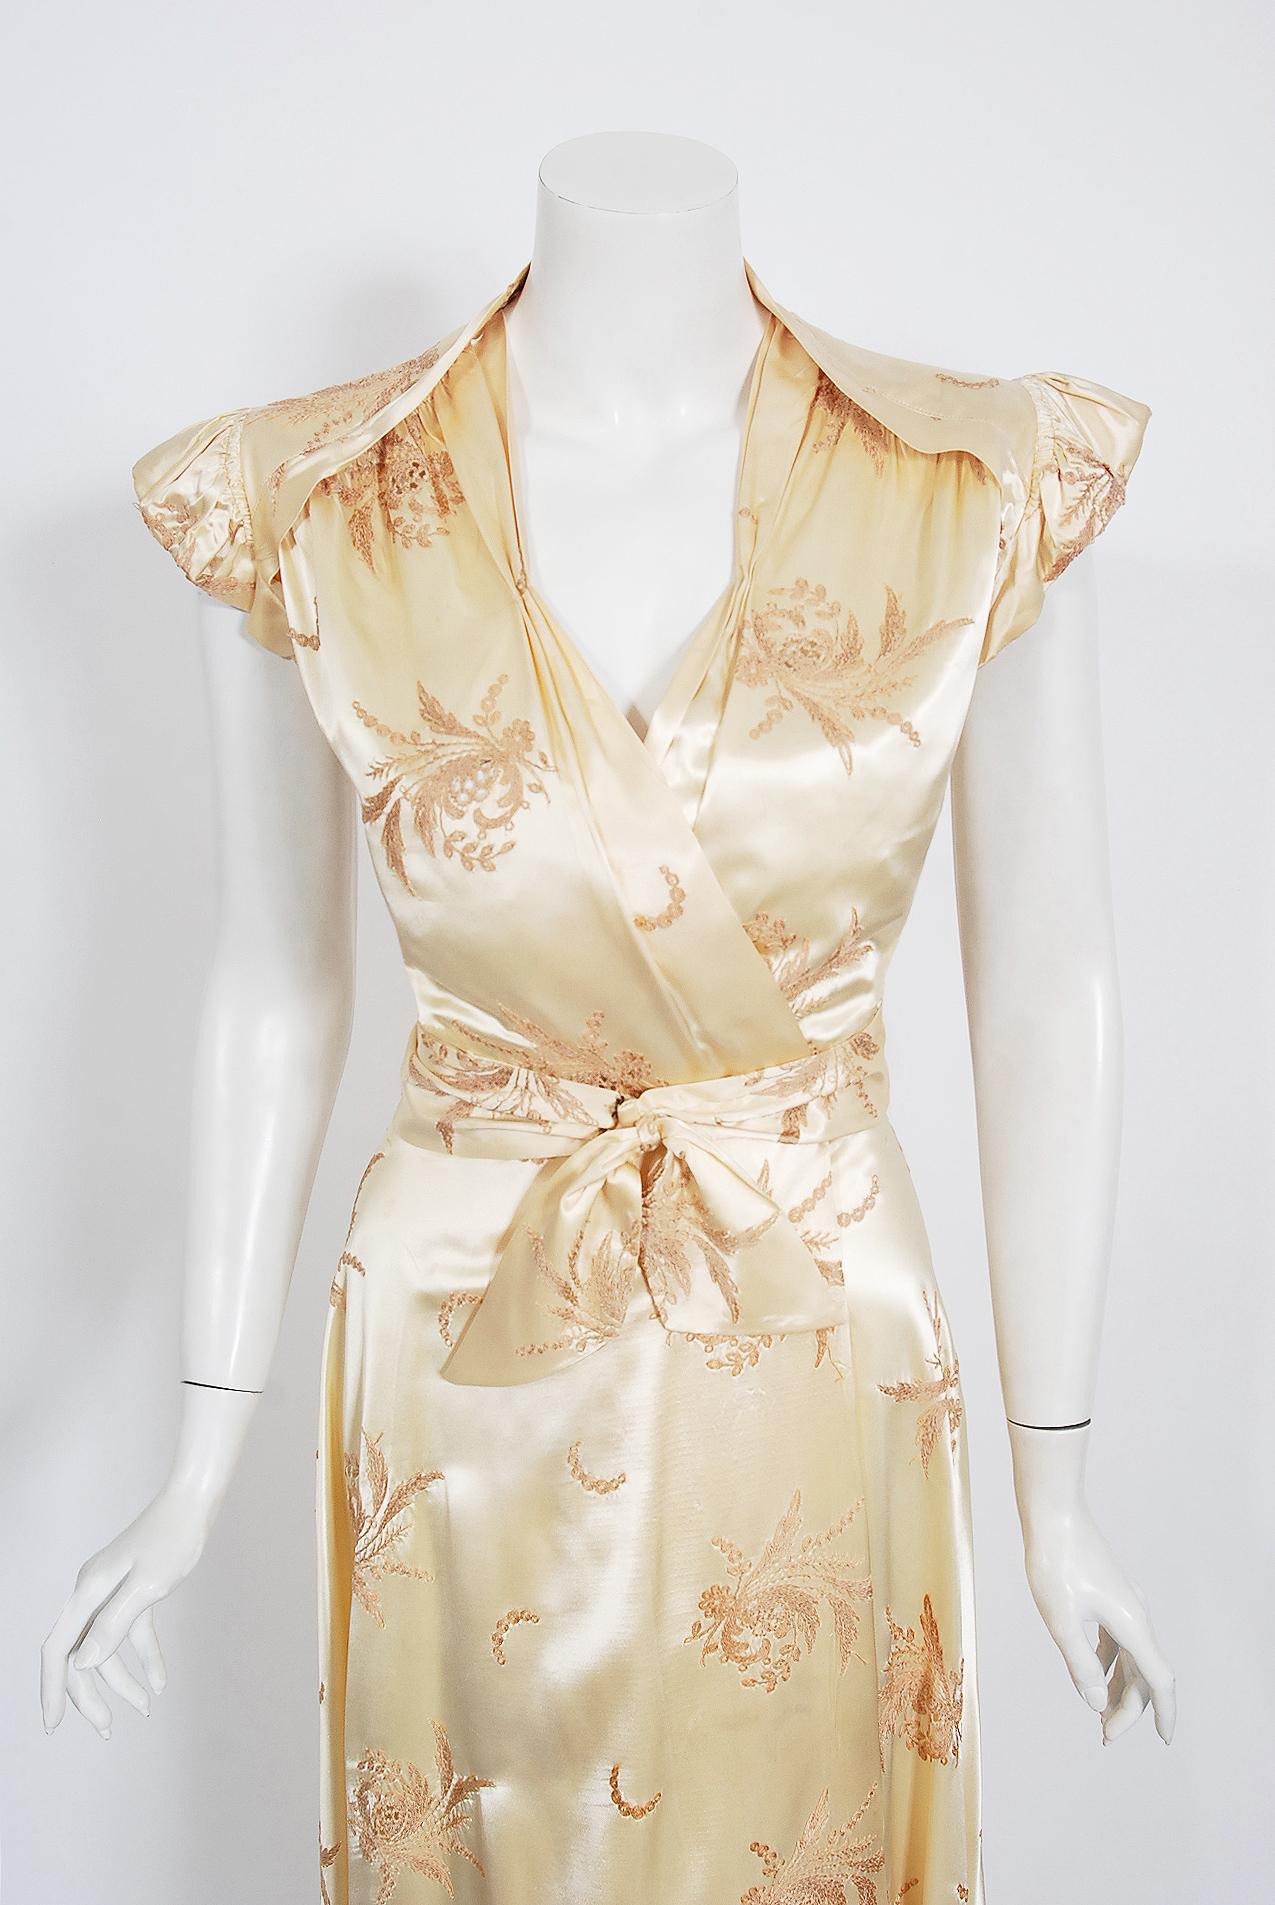 The breathtaking embroidered creme silk-satin used for this 1940's dressing gown has a fresh innocence that I find irresistible. The bodice has a flirty low-cut plunge and the most beautiful winged cap-sleeves. Love the cut-out details which show